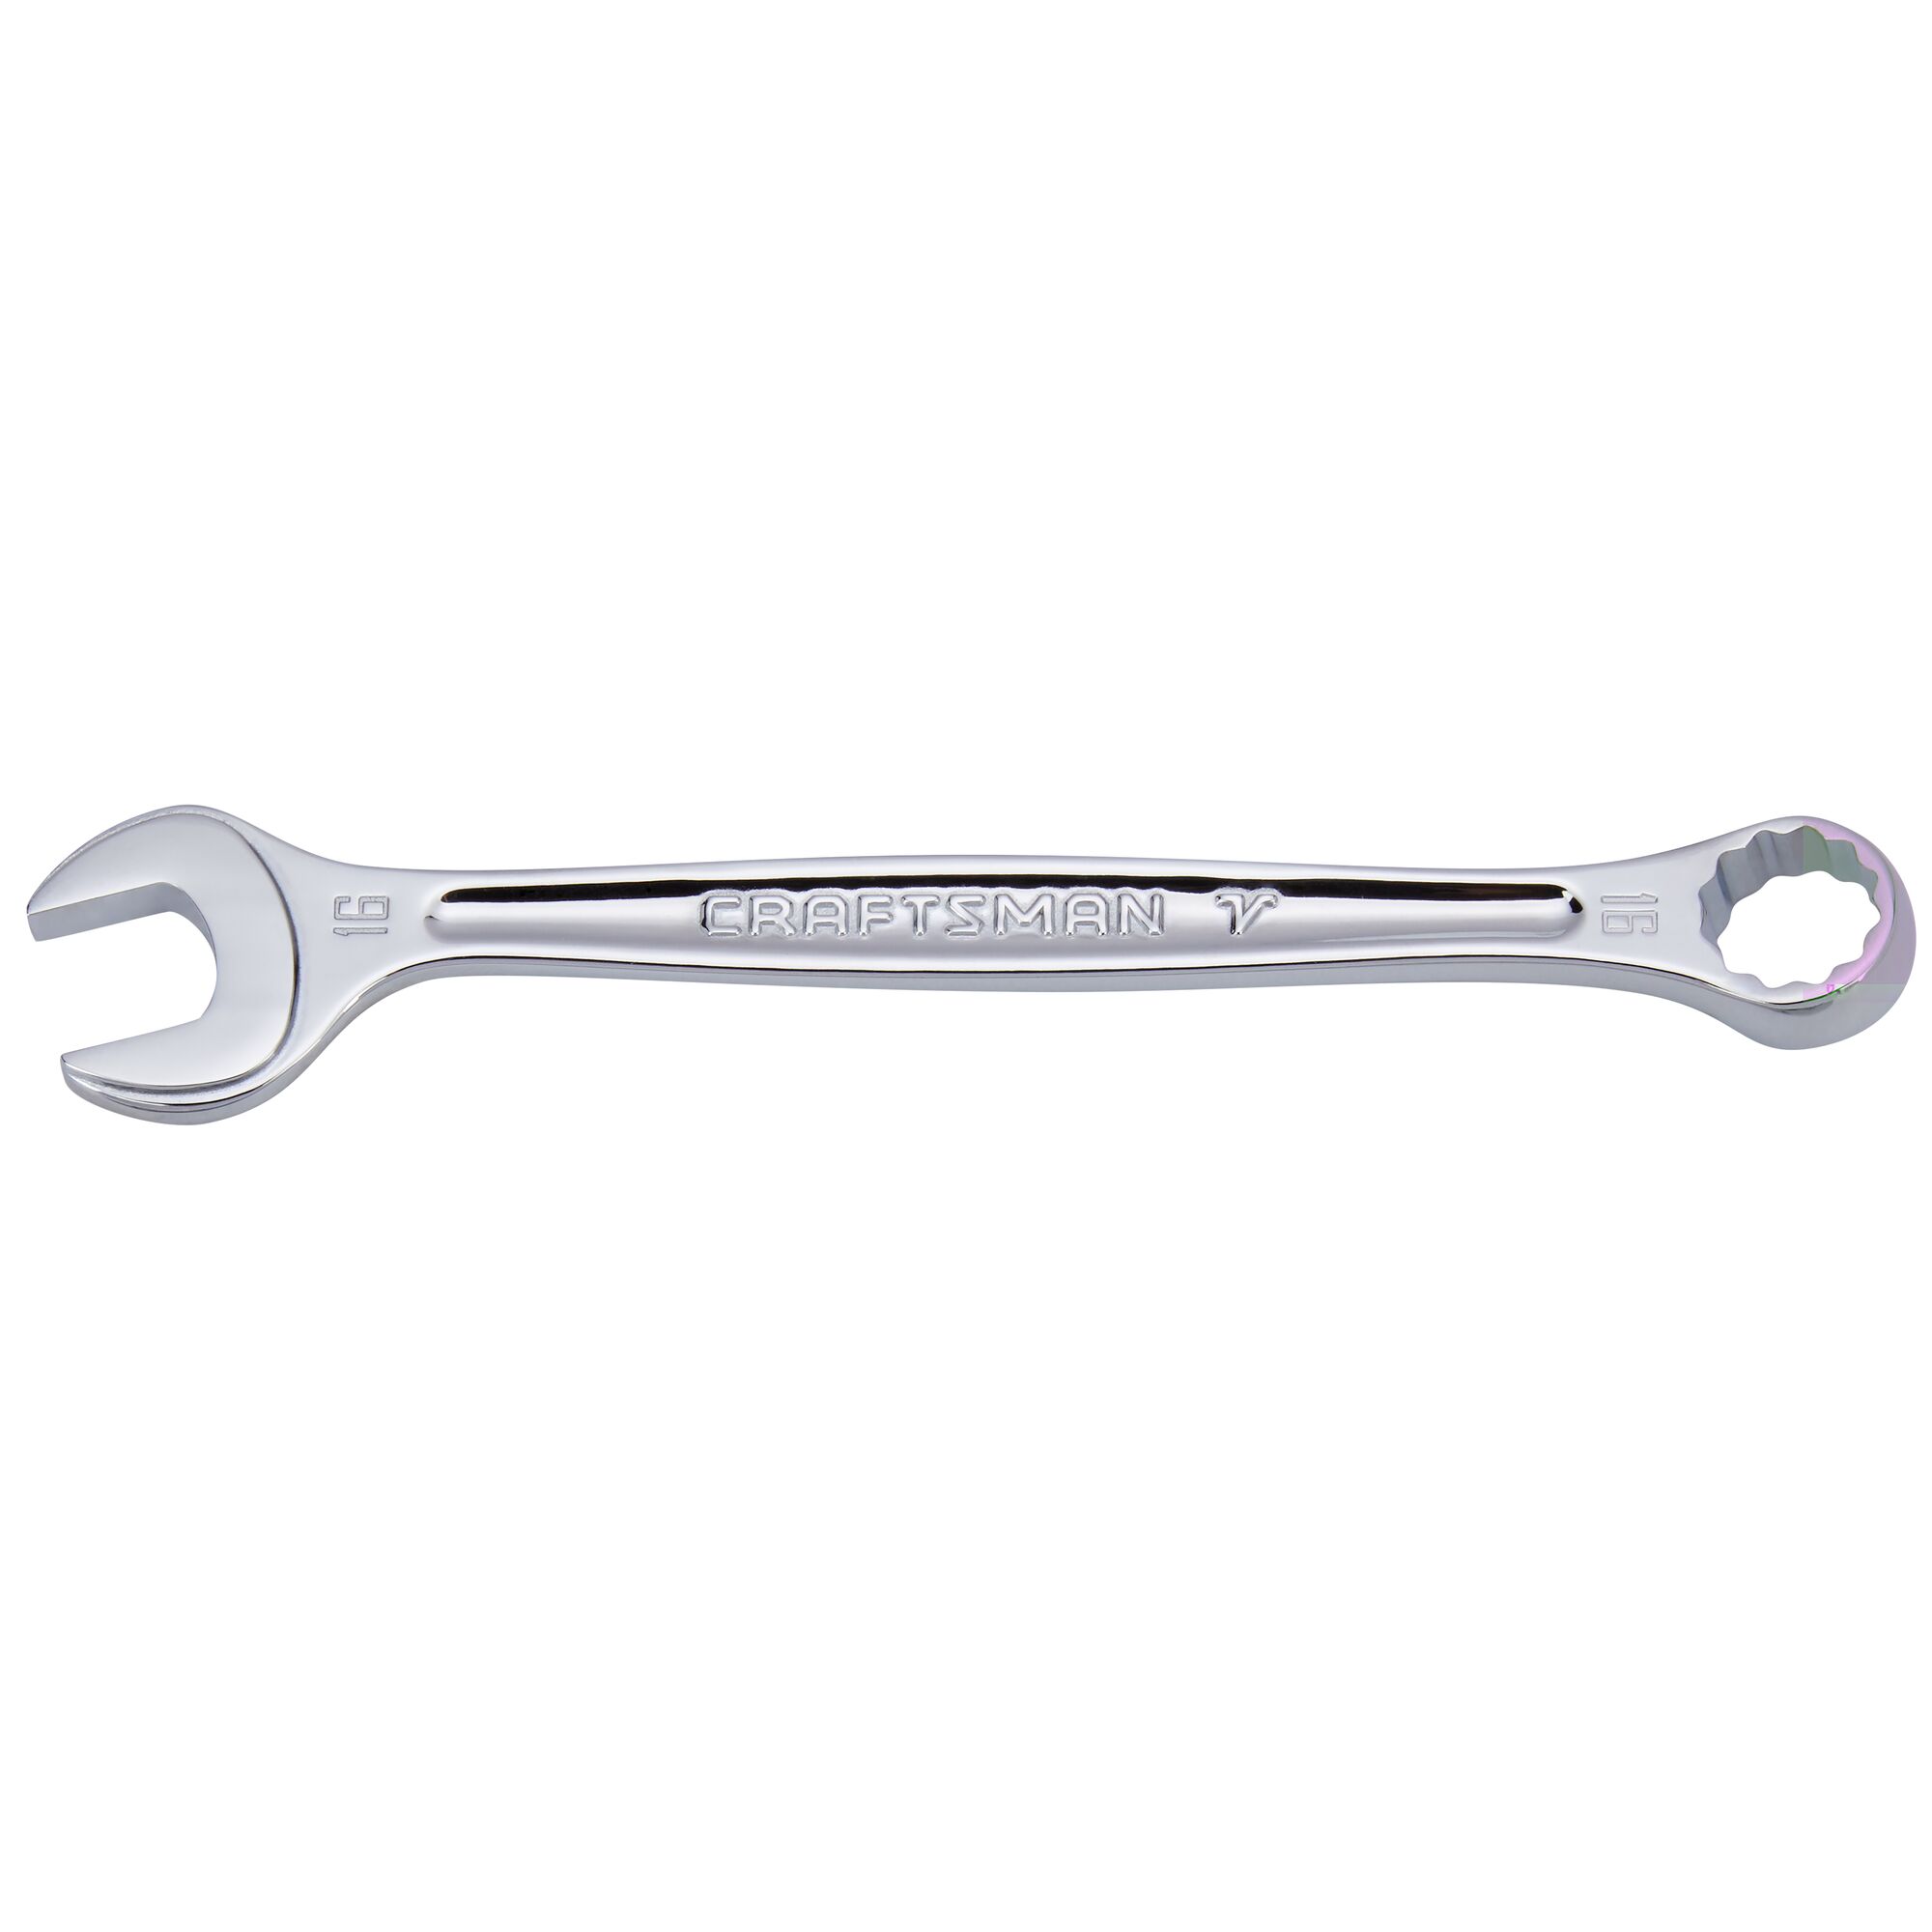 CRAFTSMAN V-SERIES Combo Wrench 16MM 